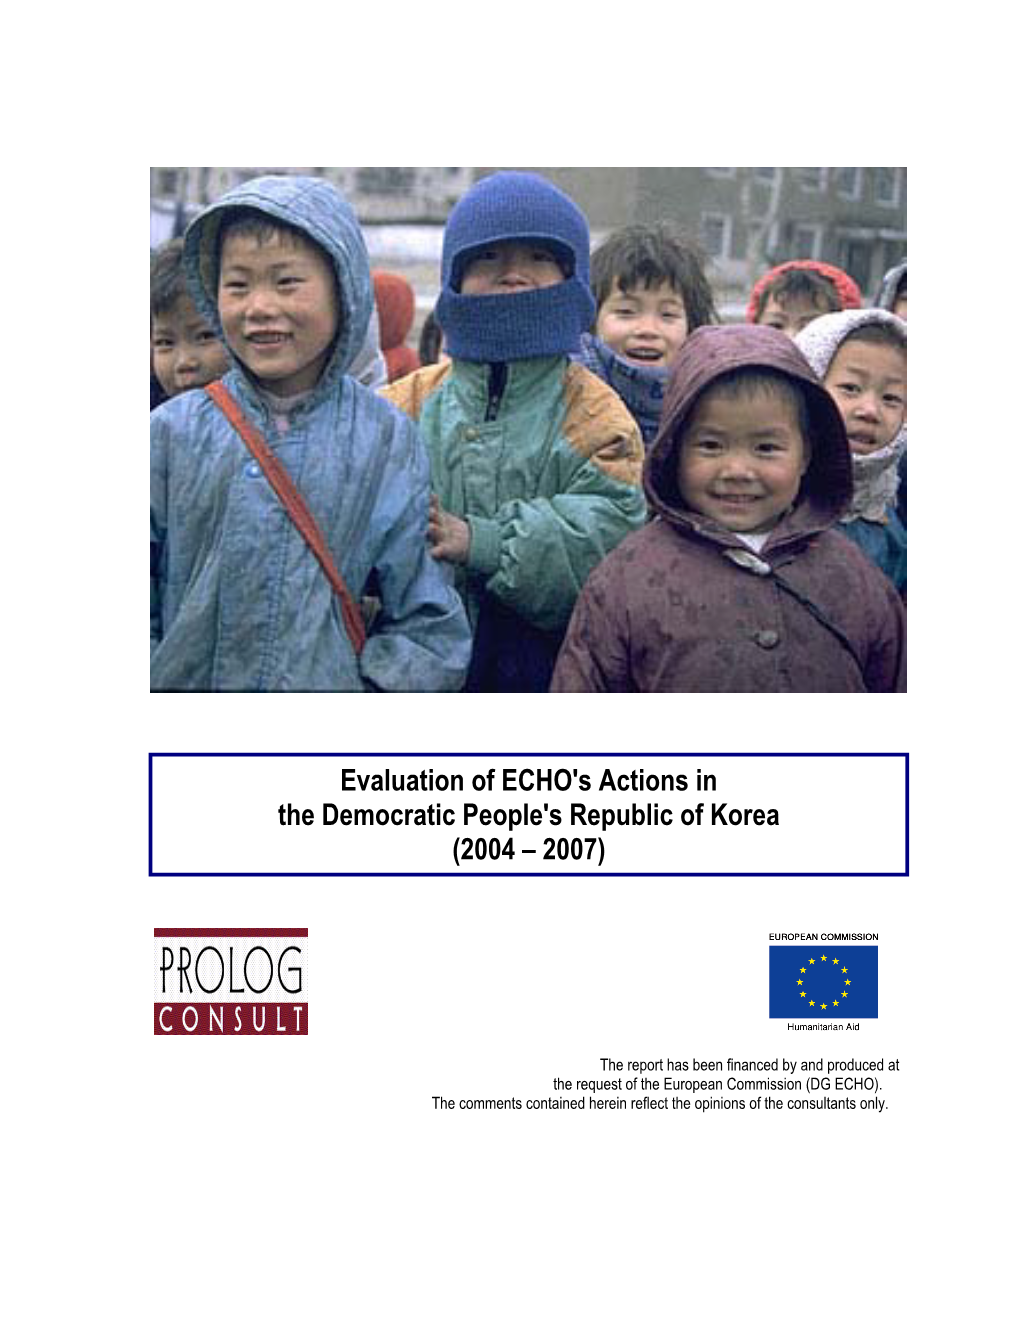 Evaluation of ECHO's Actions in the Democratic People's Republic of Korea (2004 – 2007)